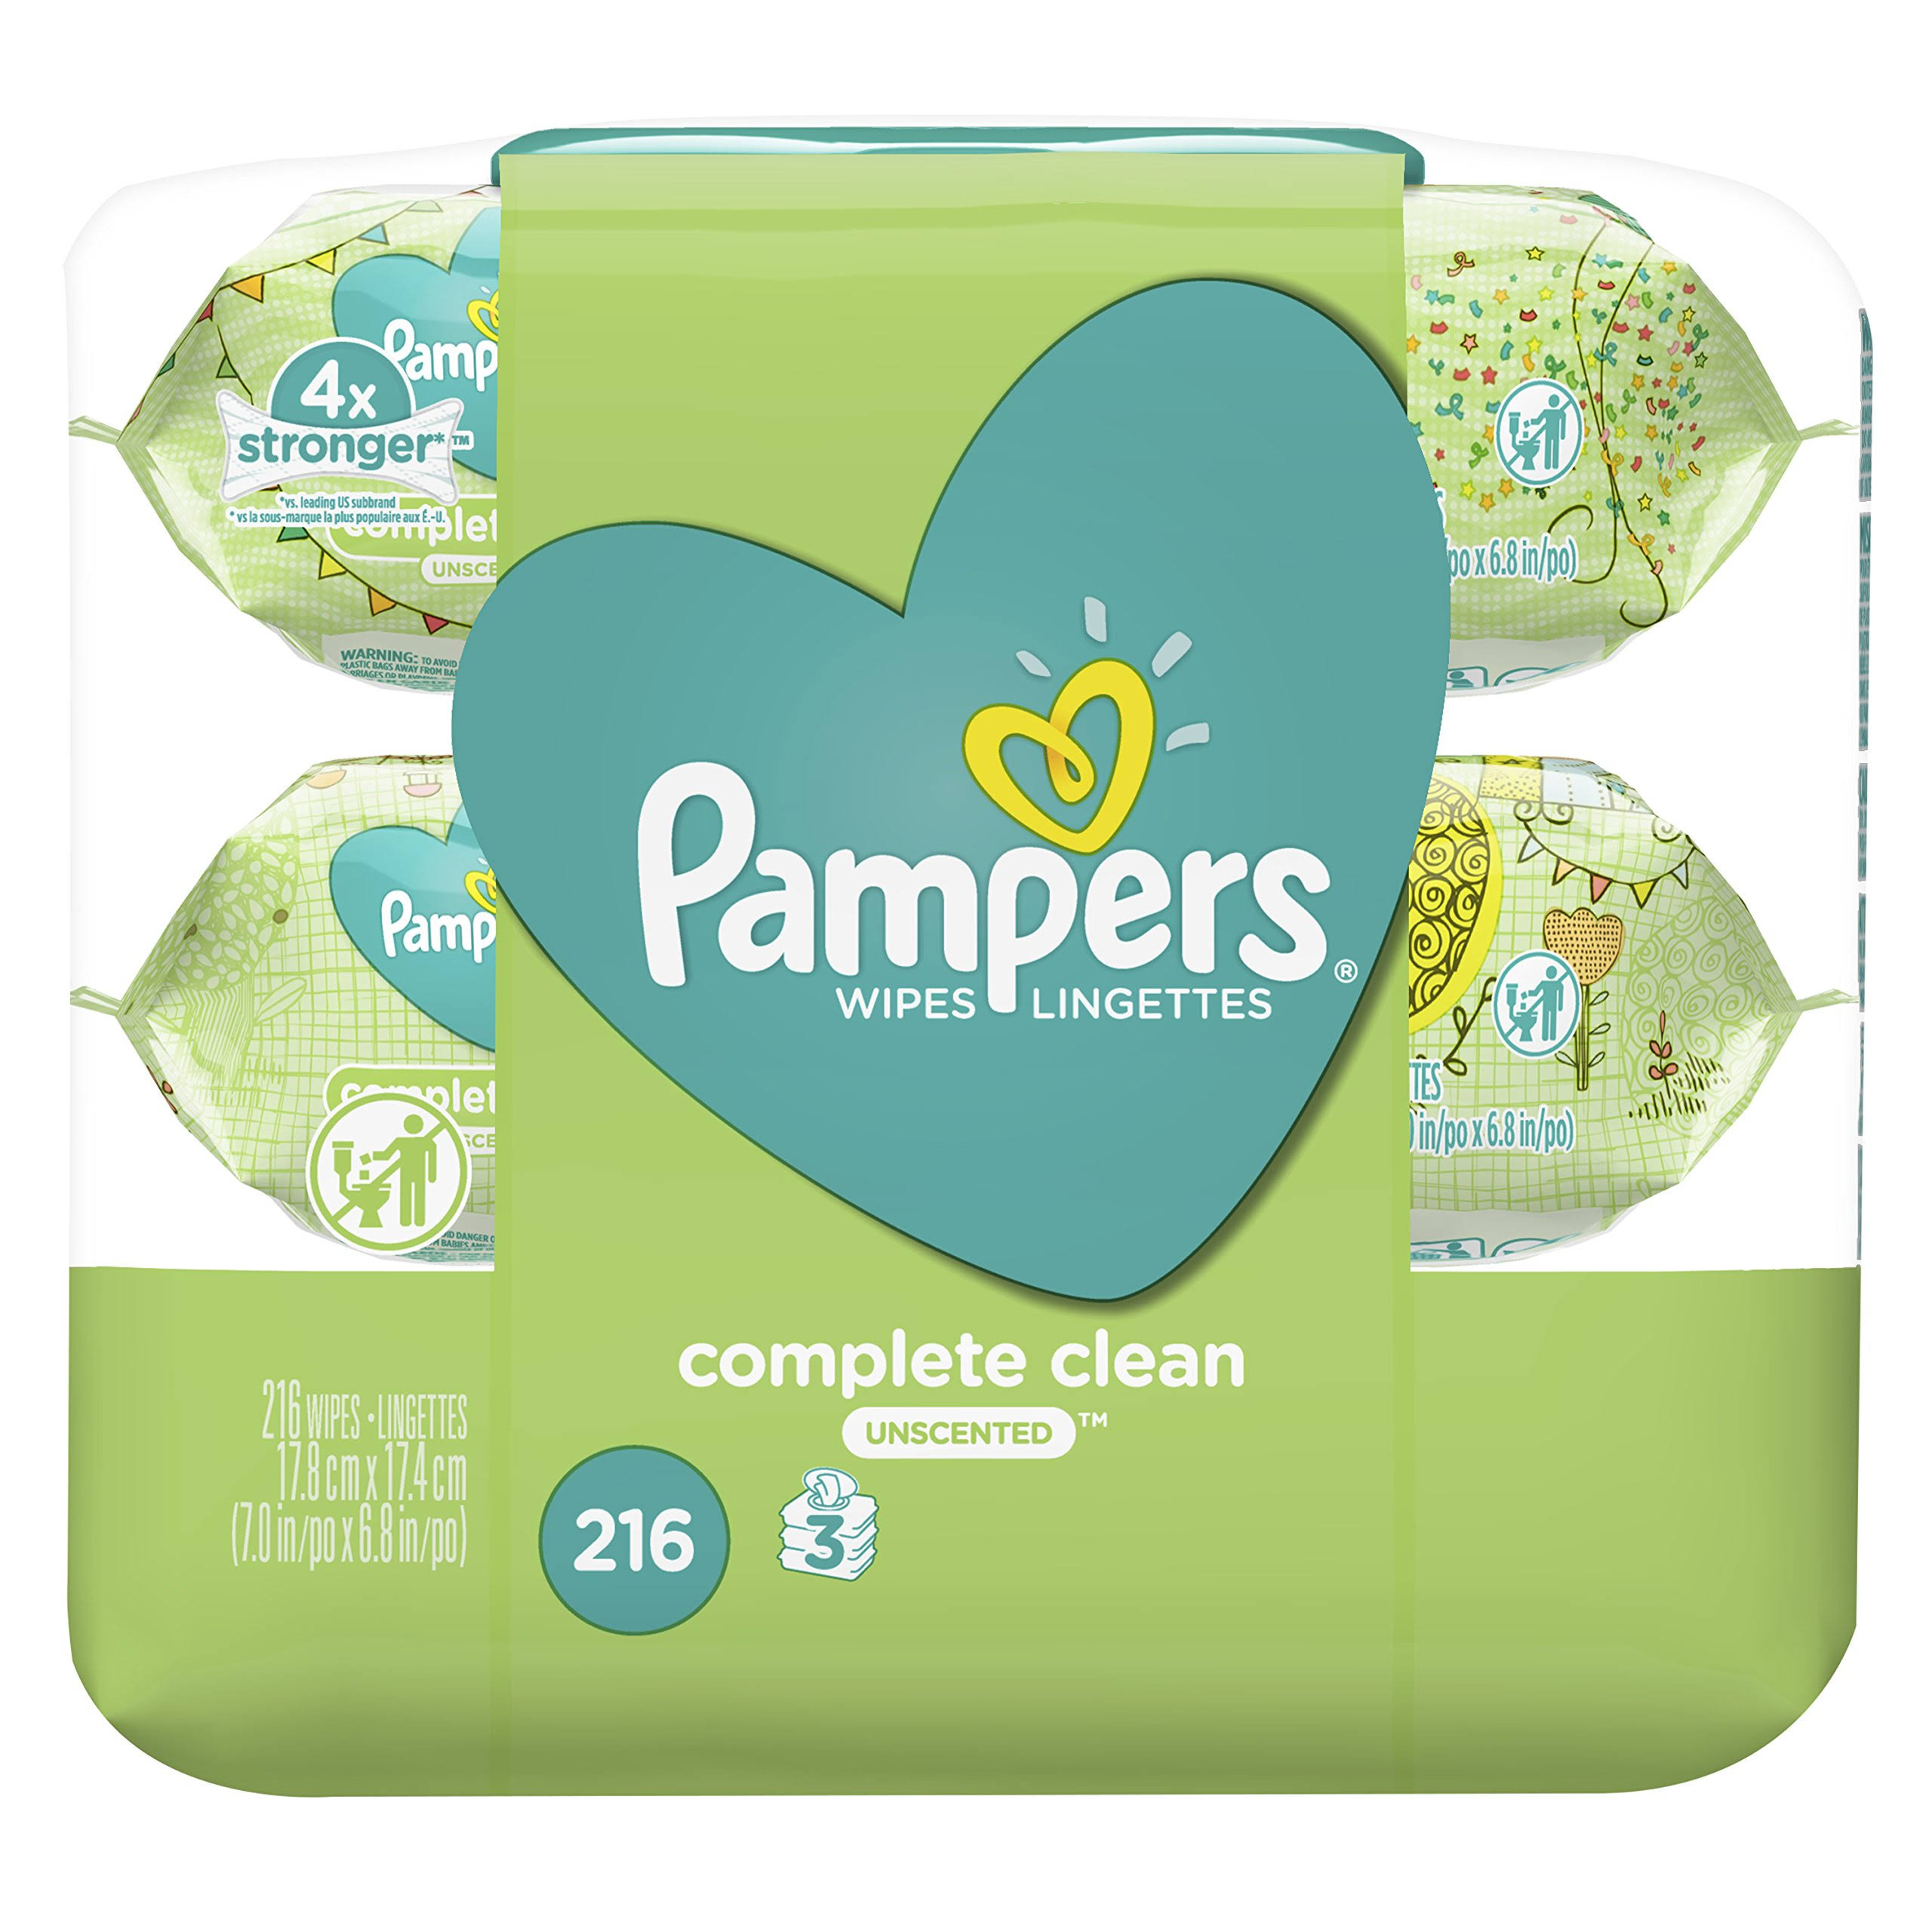 Pampers Baby Wipes Complete Clean Unscented 3x Pop-Top 216 Count